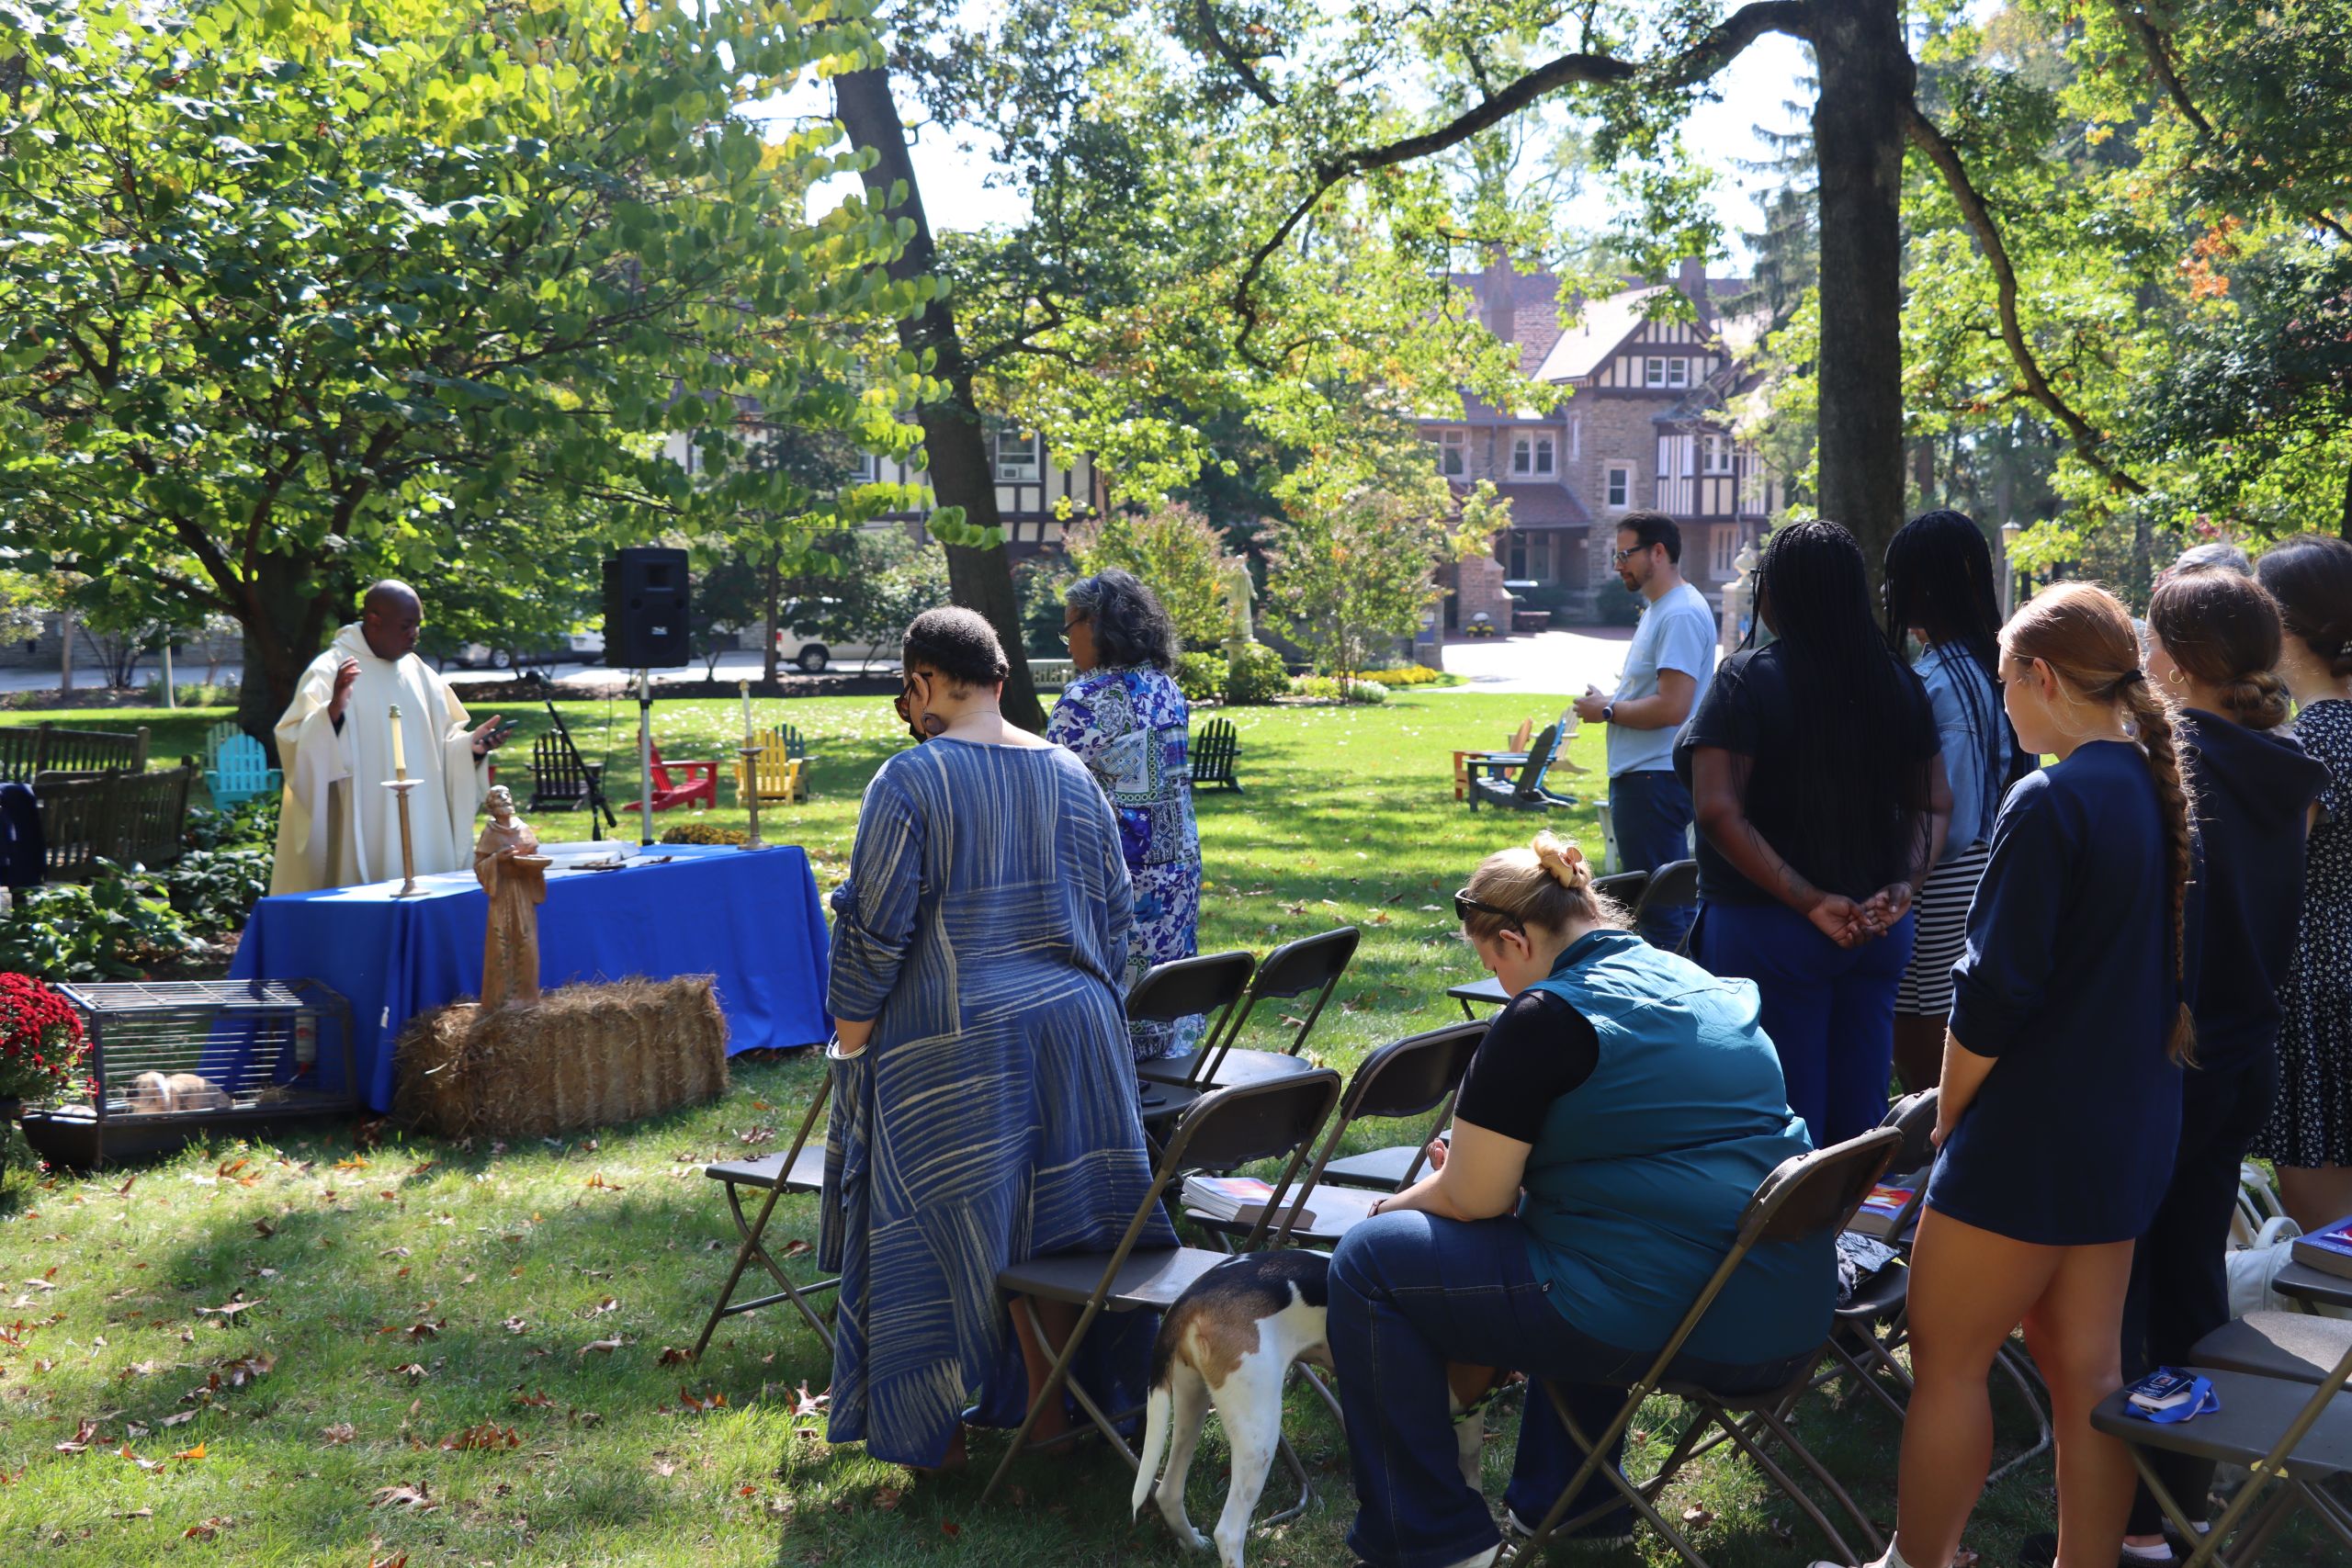 St. Francis mass and blessing of the animals by the Commons Peace Pole. Photo by Emily Shultz